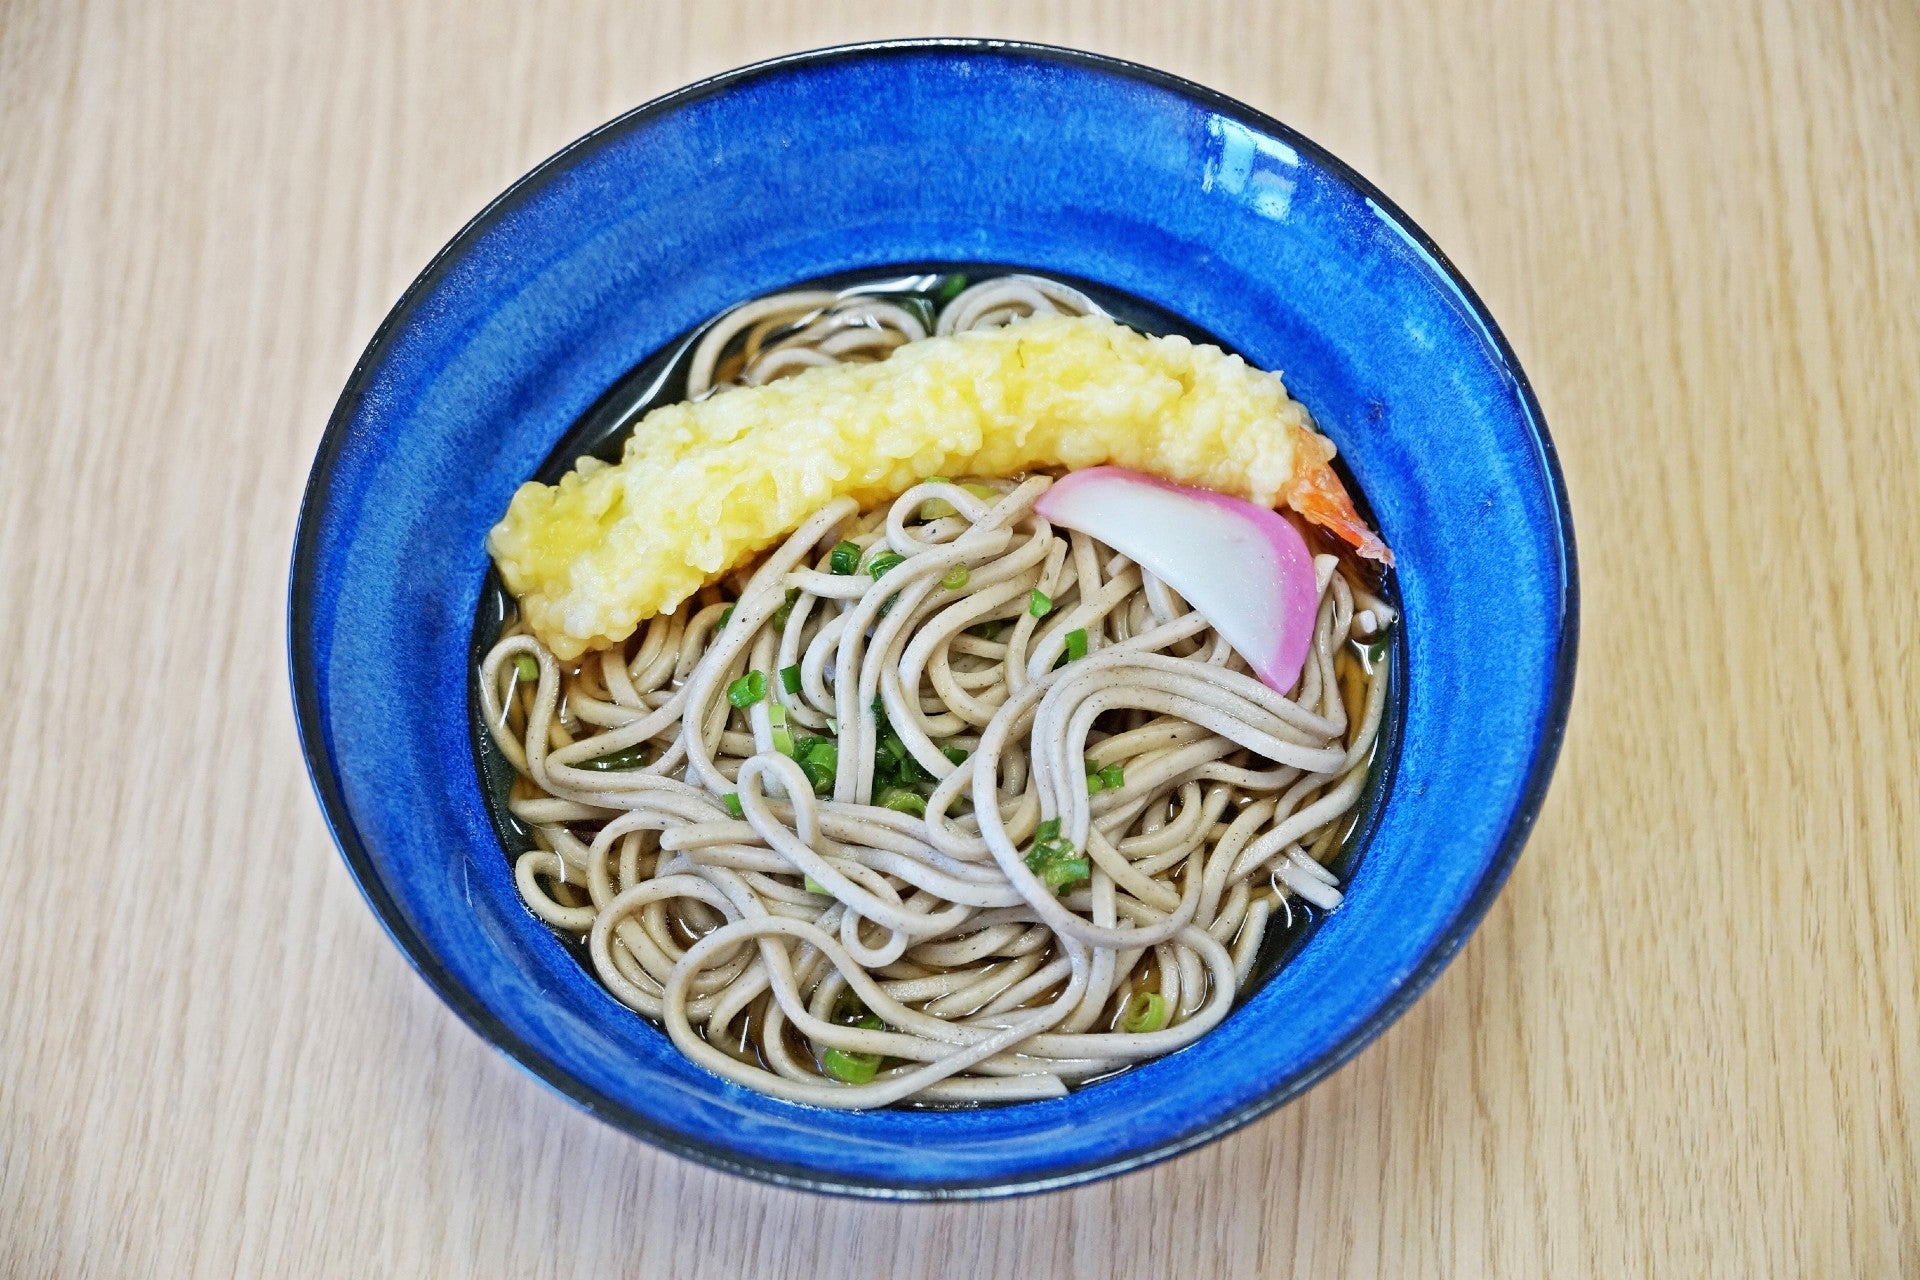 Soba and fried shrimp in a blue bowl.